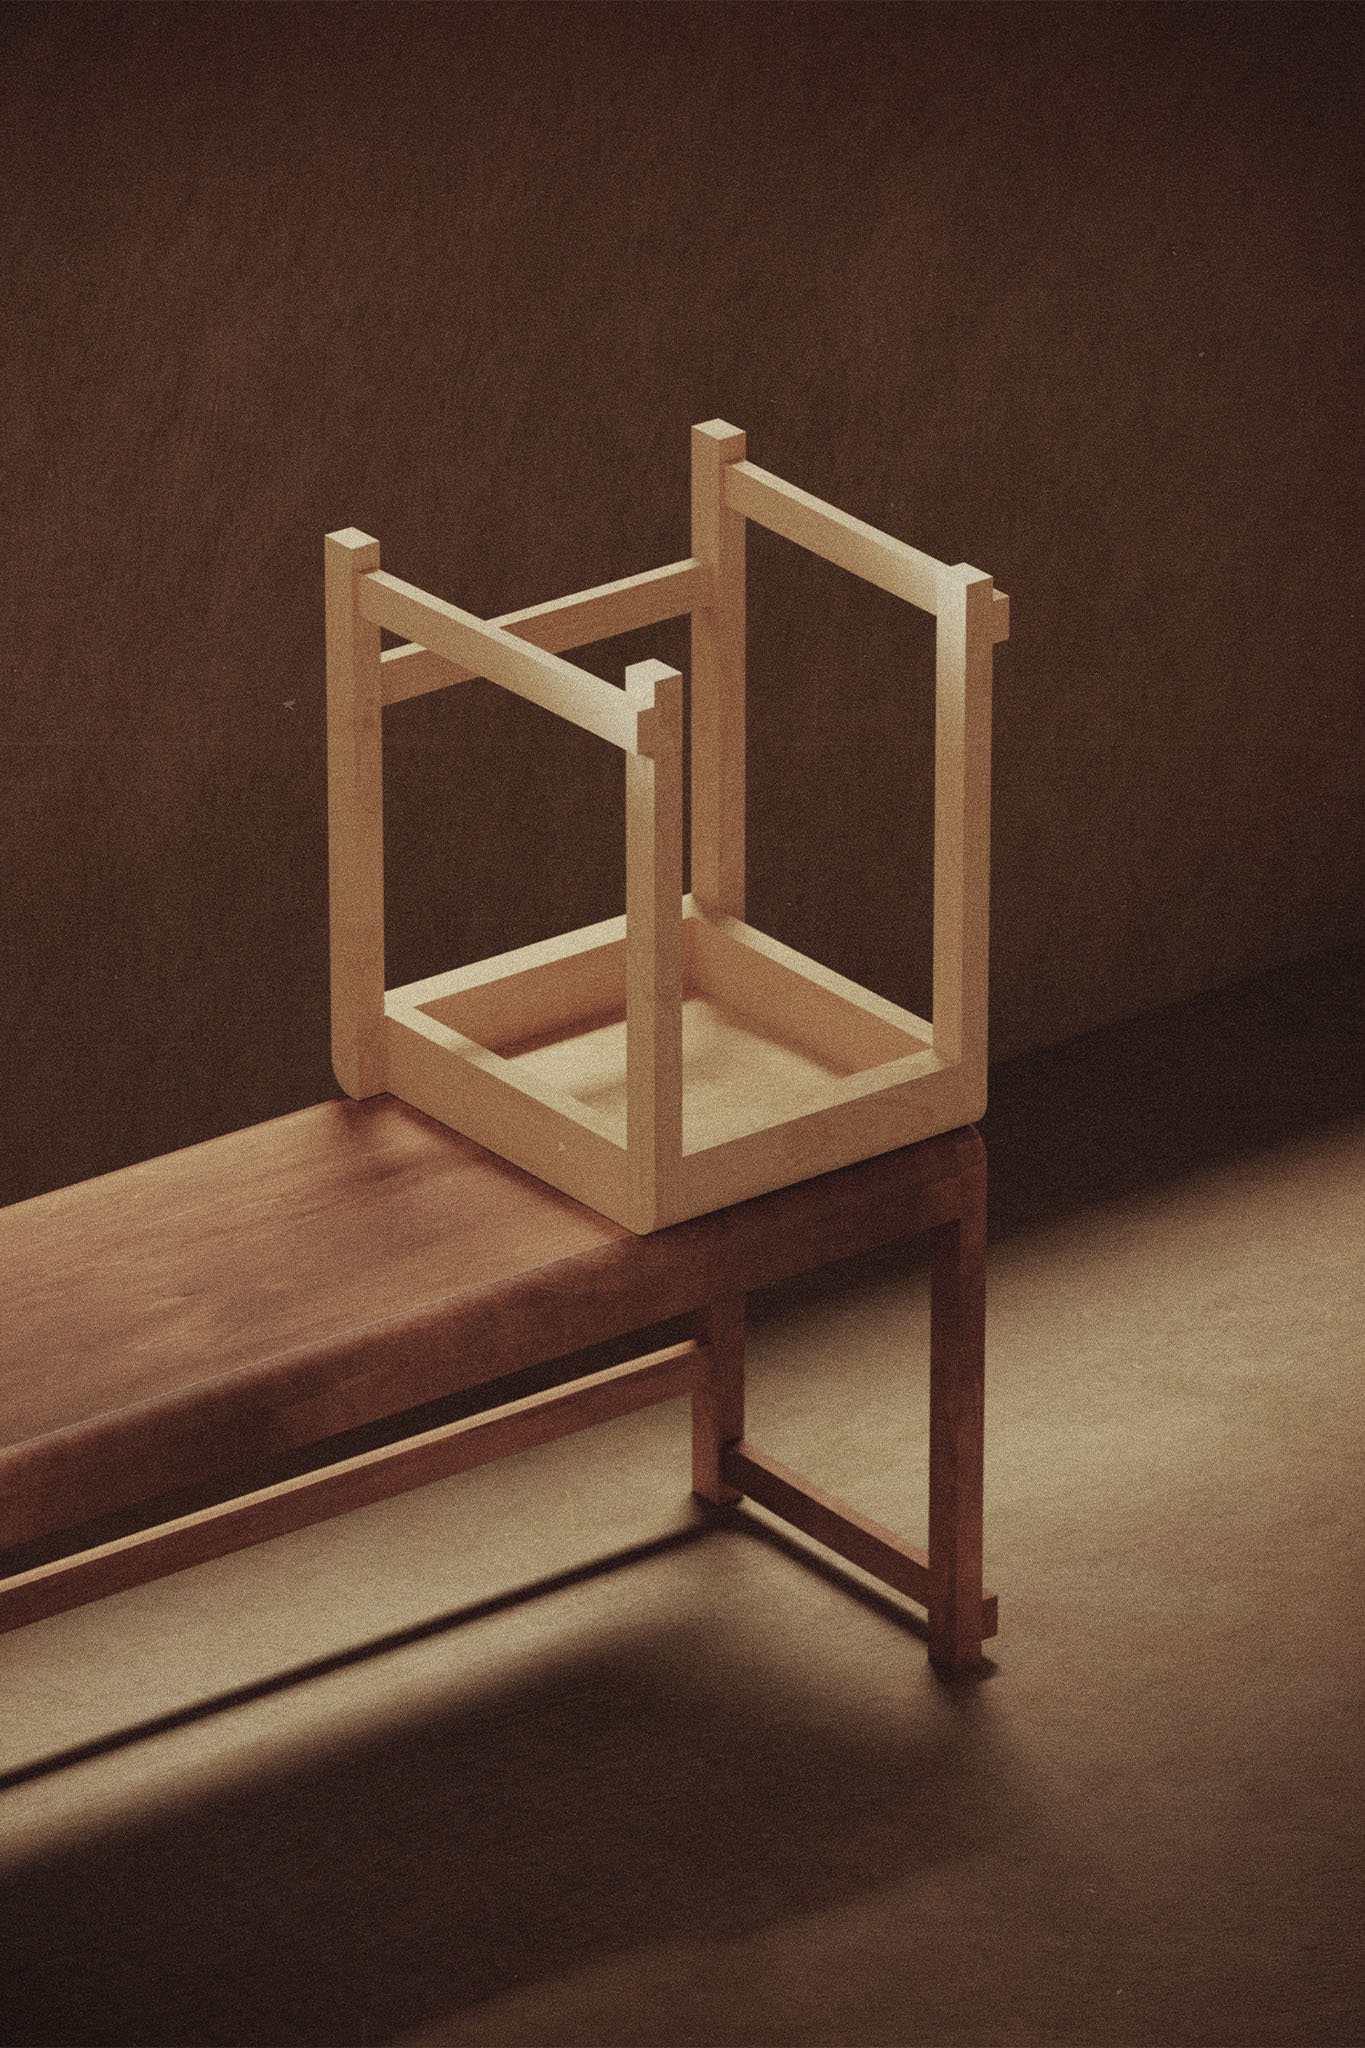 Frama Stool 01 Low in Natural Birch. Image provided by Frama.